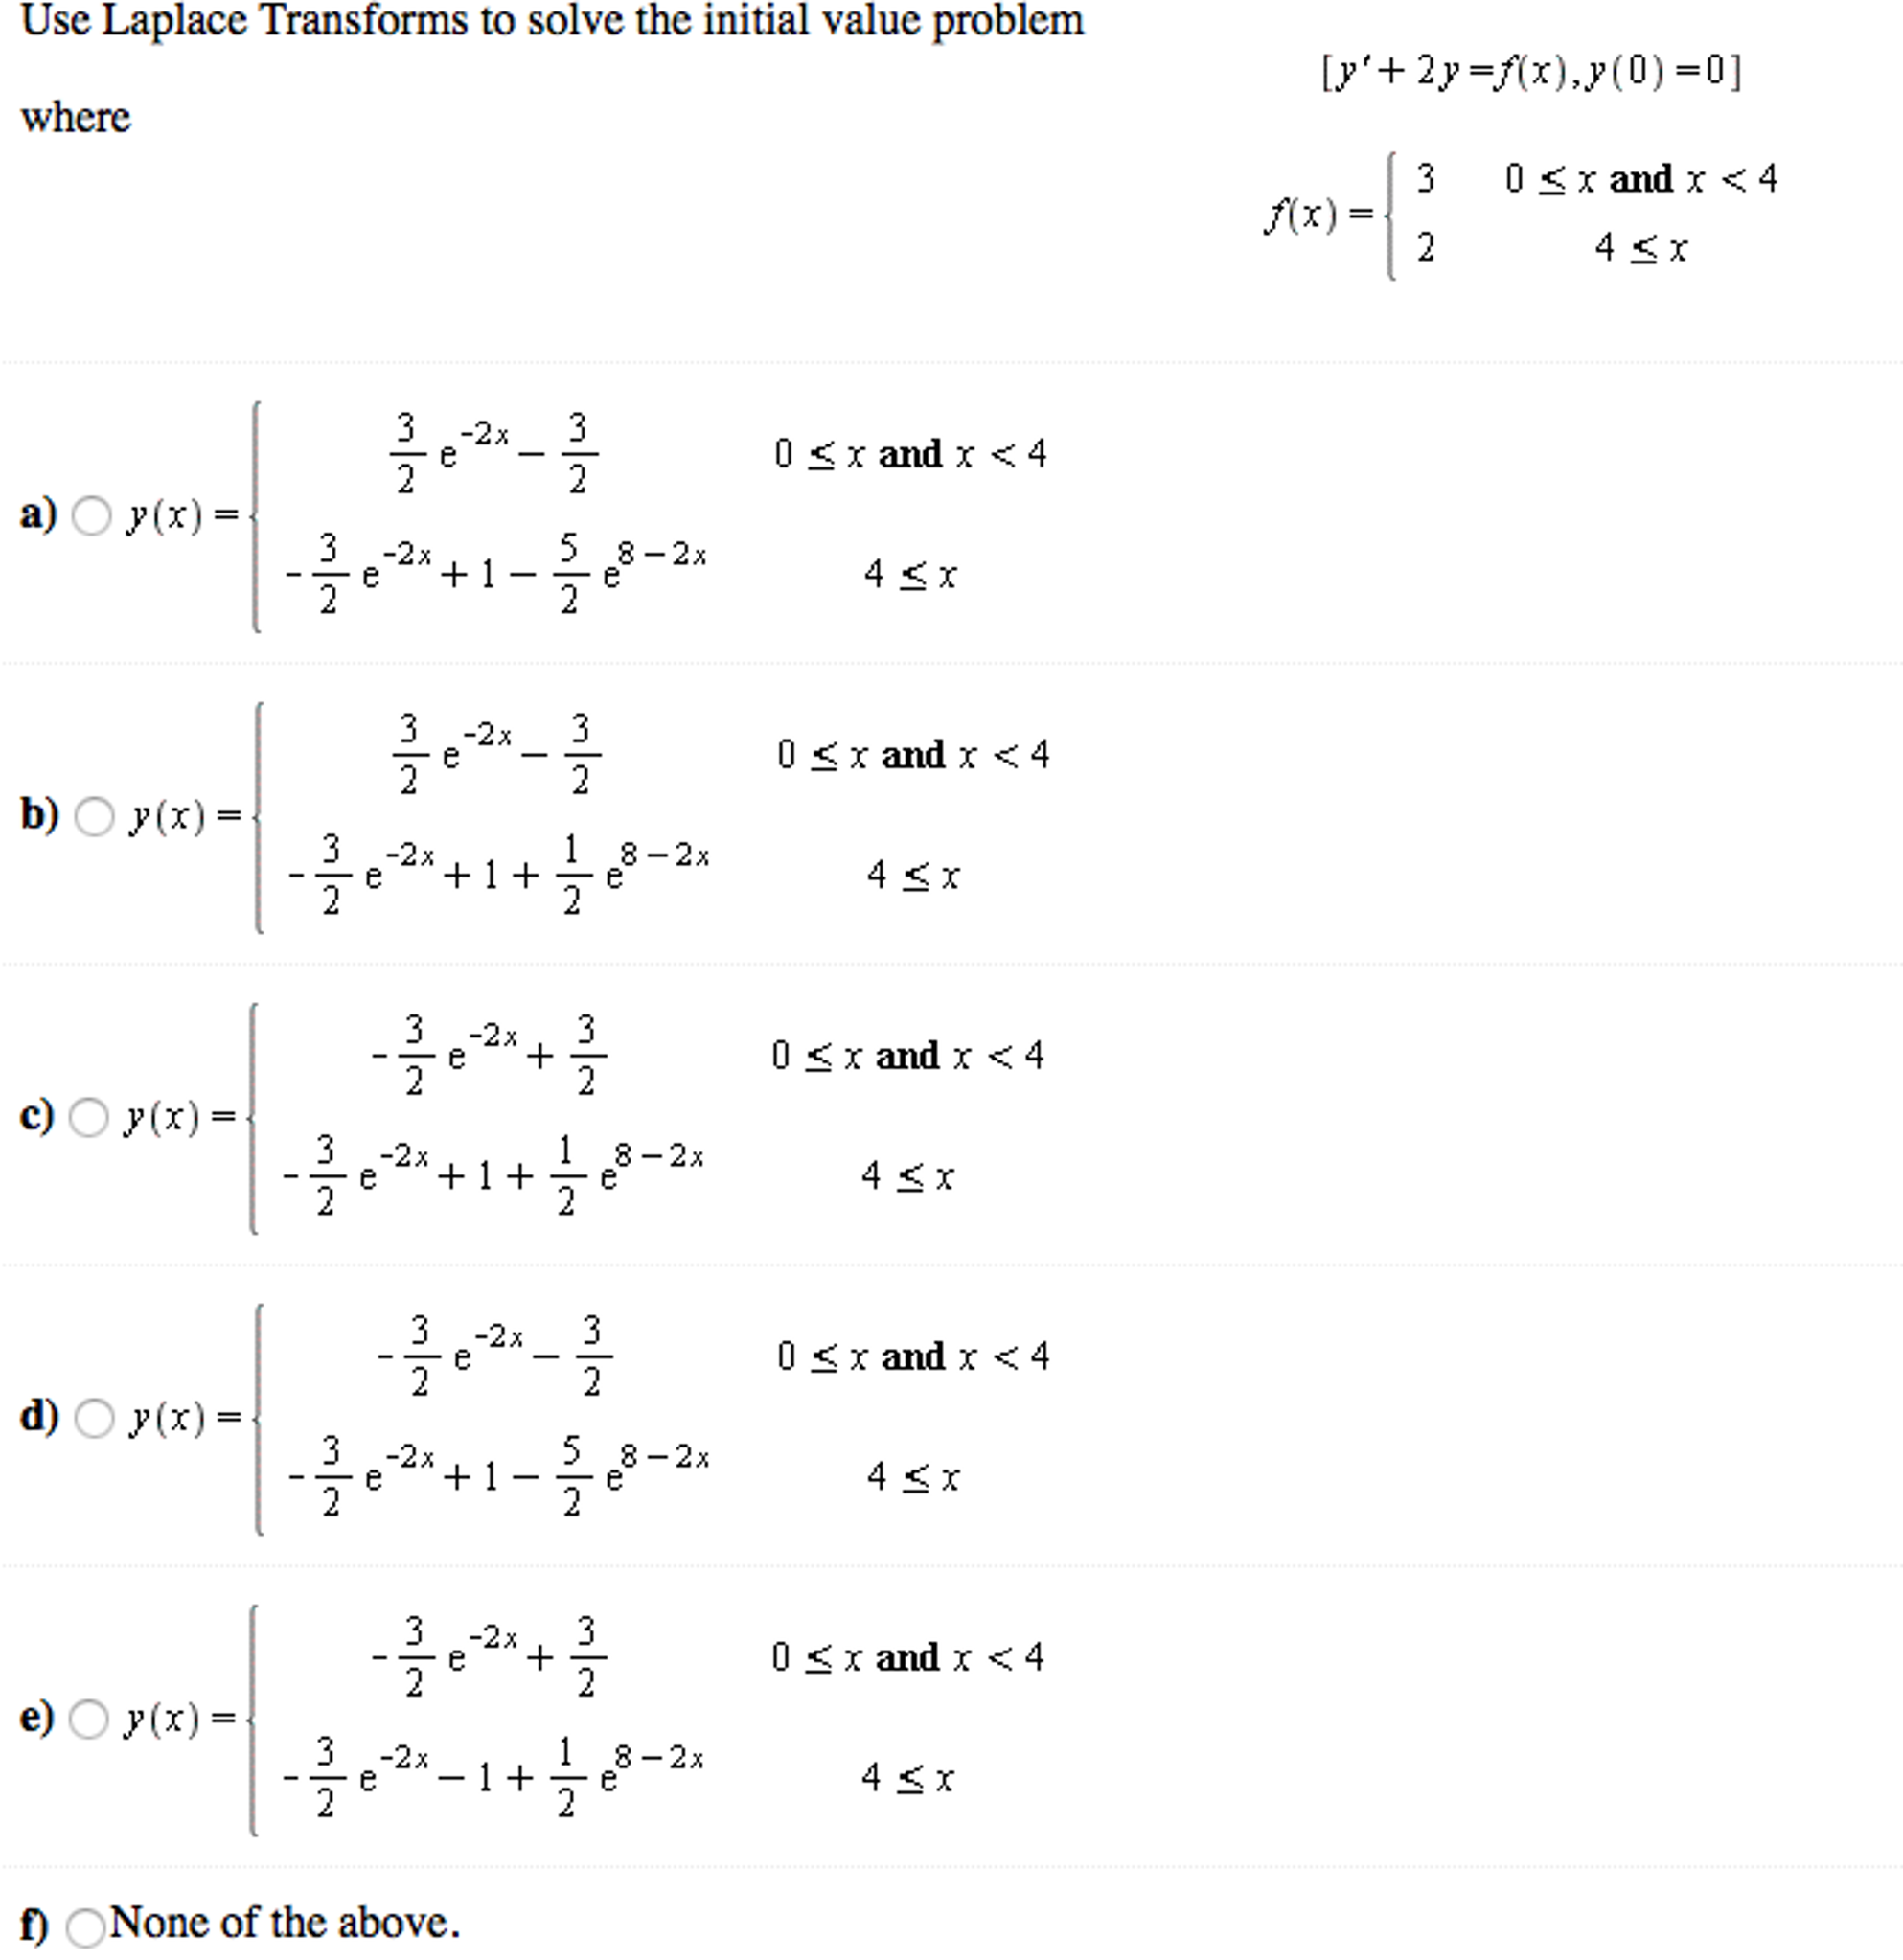 solve the given initial value problem in which the input function g(x) is discontinuous